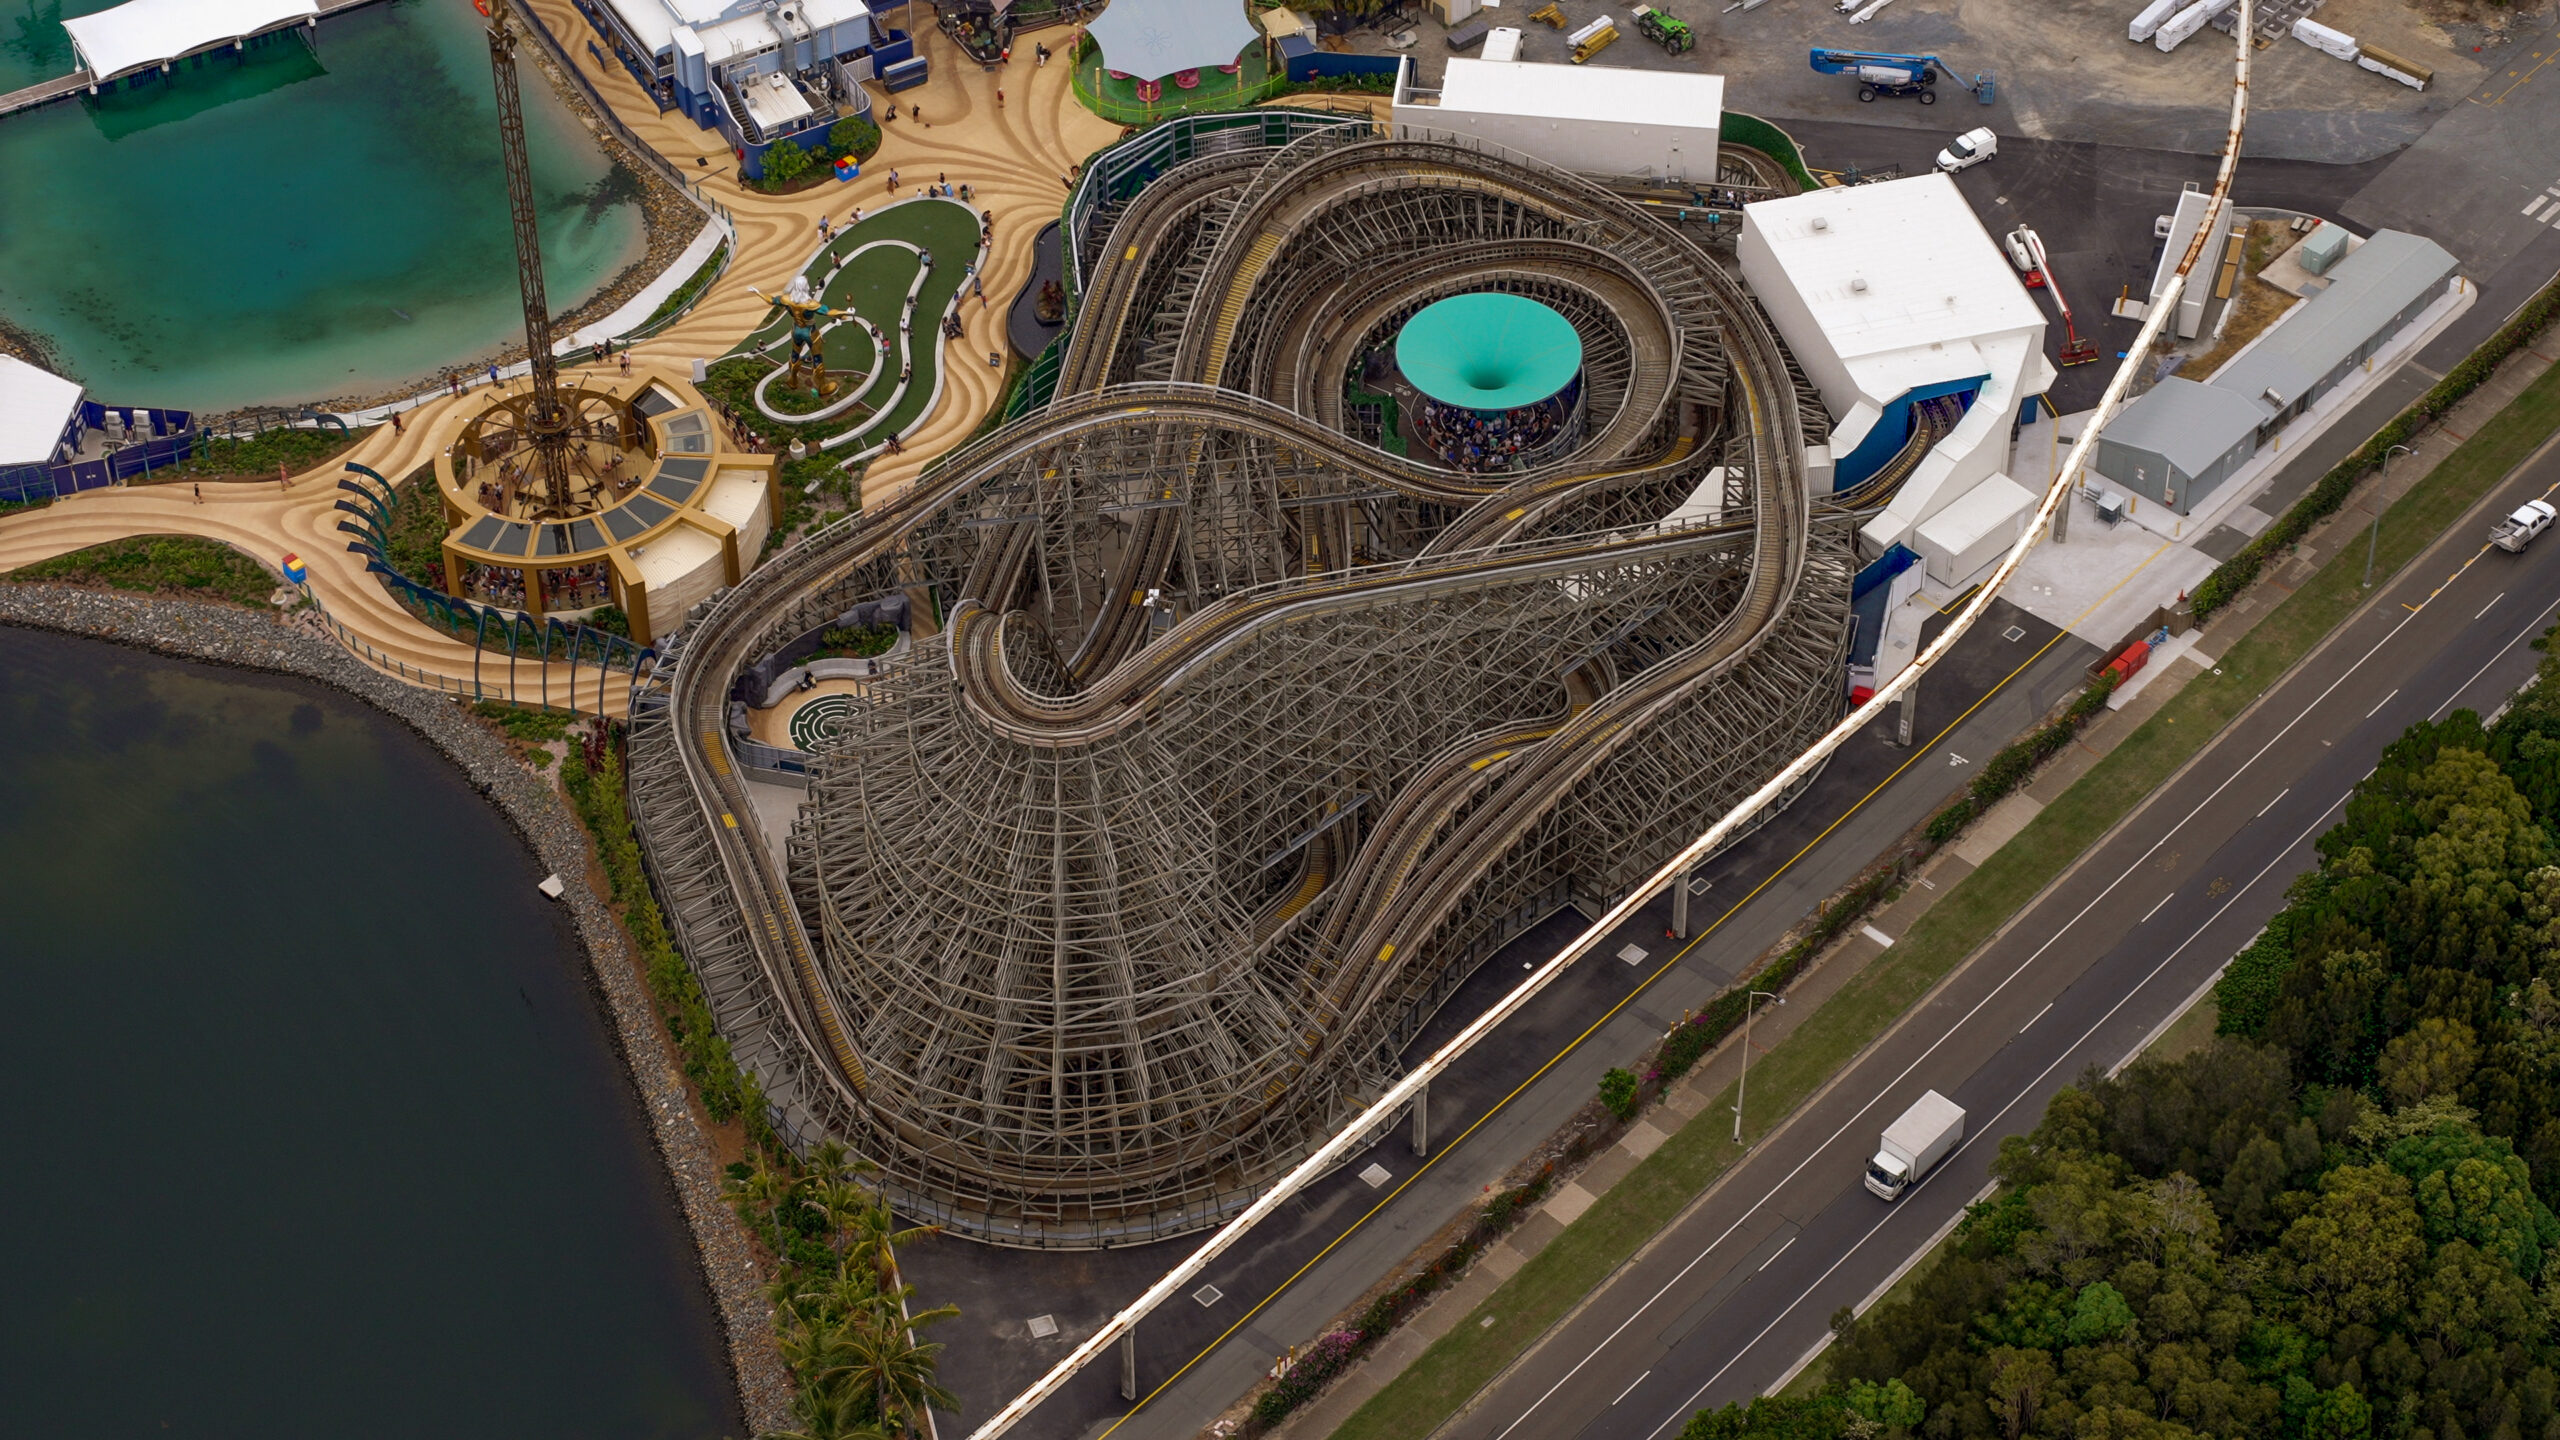 Newest Martin &#038; Vleminckx coaster at Sea World Gold Coast to feature record-breaking crossovers, top speed of 85km/h, and custom theming